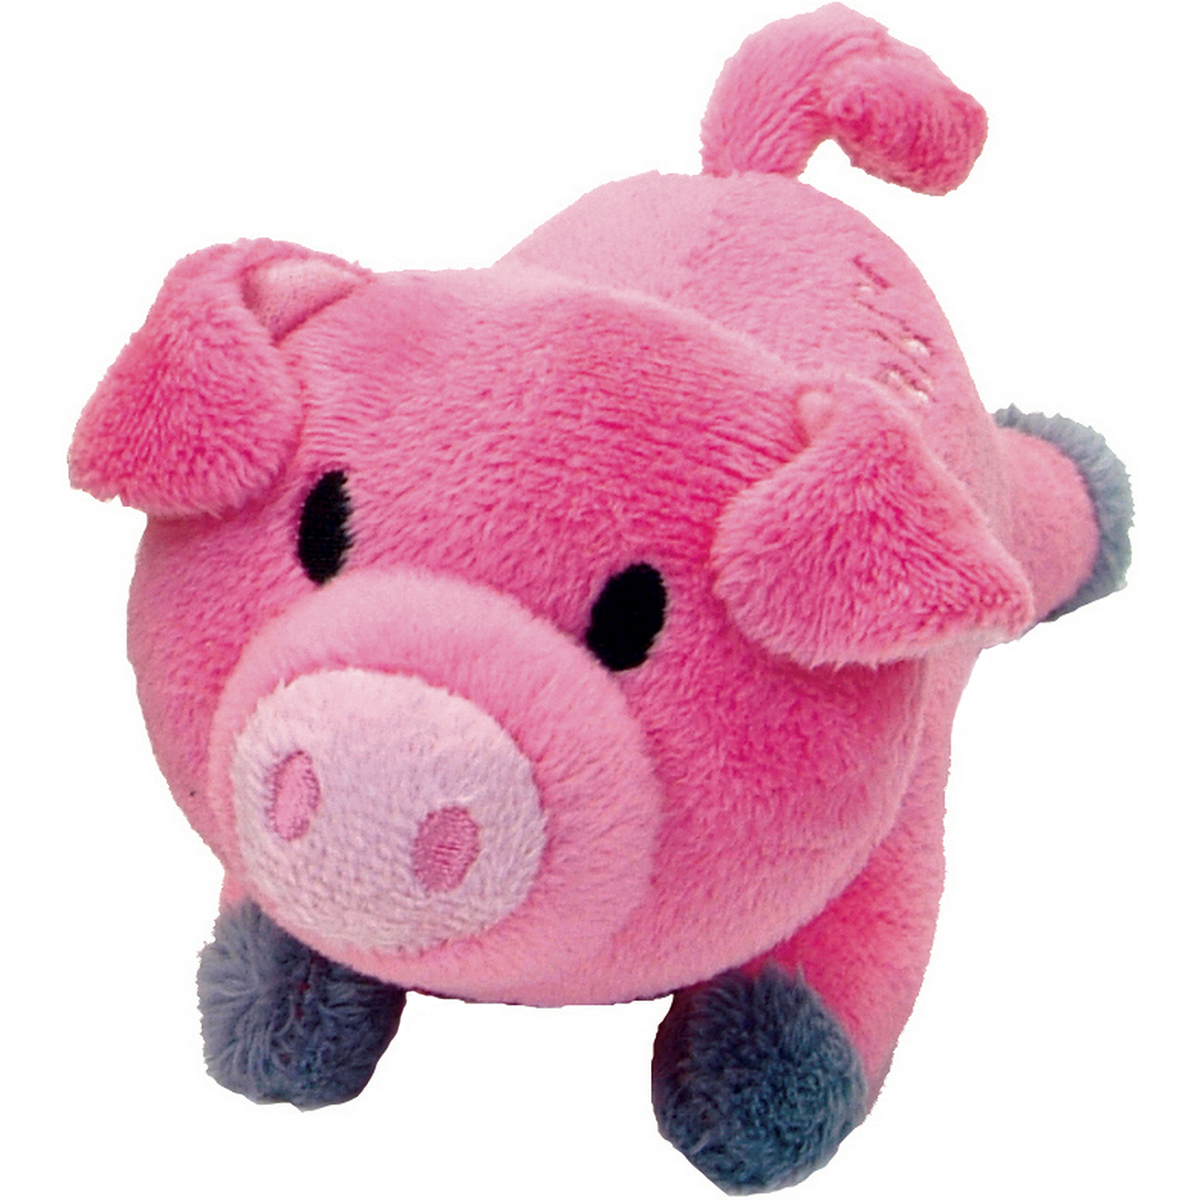 4.5 In. Lil Pals Plush Dog Toy - Pig, Pink